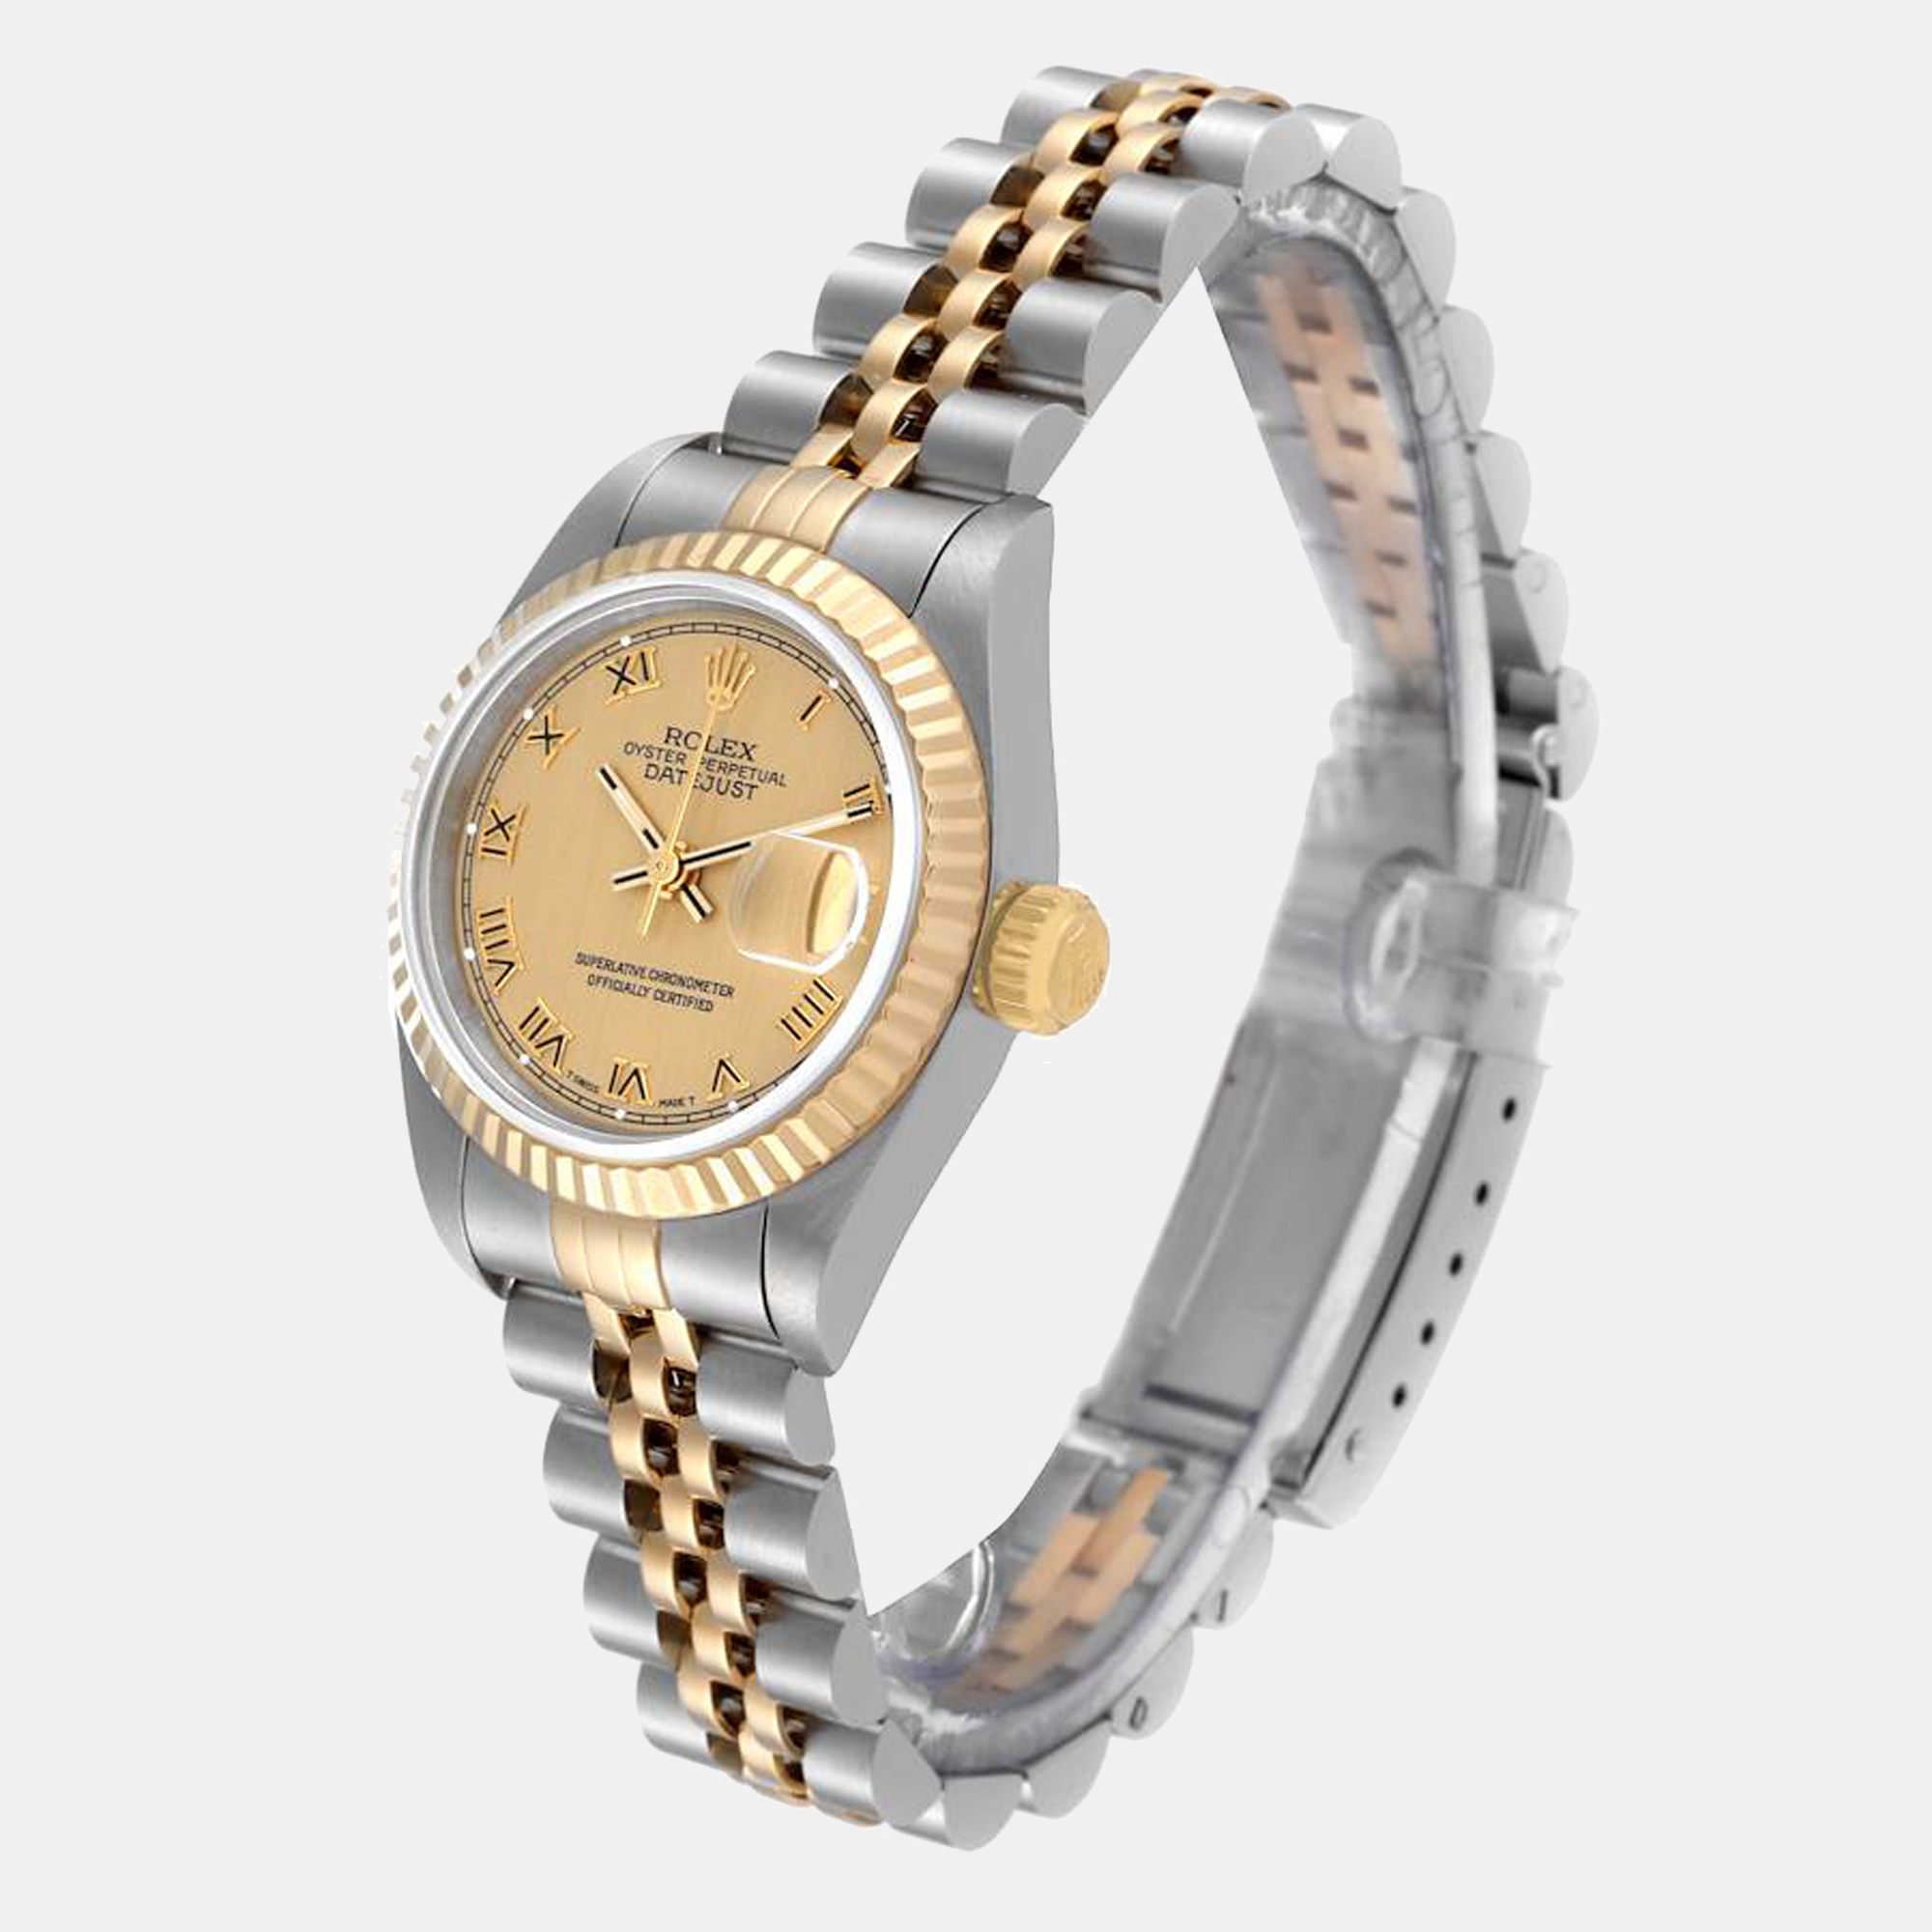 Rolex Champagne 18K Yellow Gold And Stainless Steel Datejust 69173 Women's Wristwatch 26 Mm